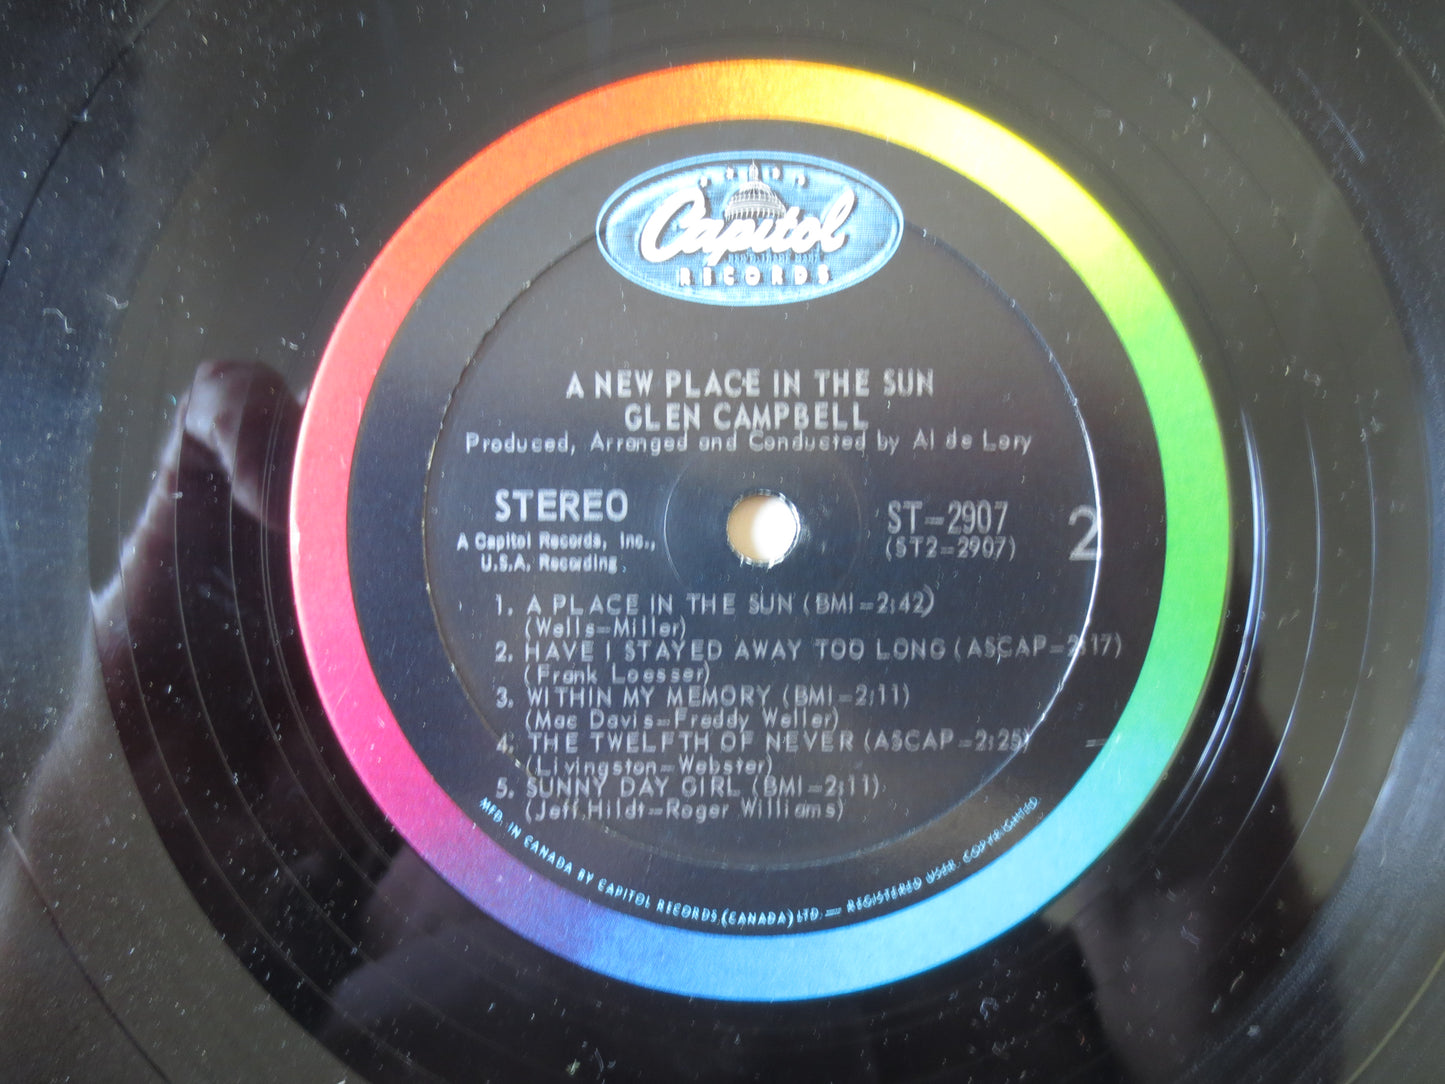 GLEN CAMPBELL Album, A New Place In The SUN, Glen Campbell Vinyl, Glen Campbell Lp, Country Record, Vinyl Lps, 1968 Records